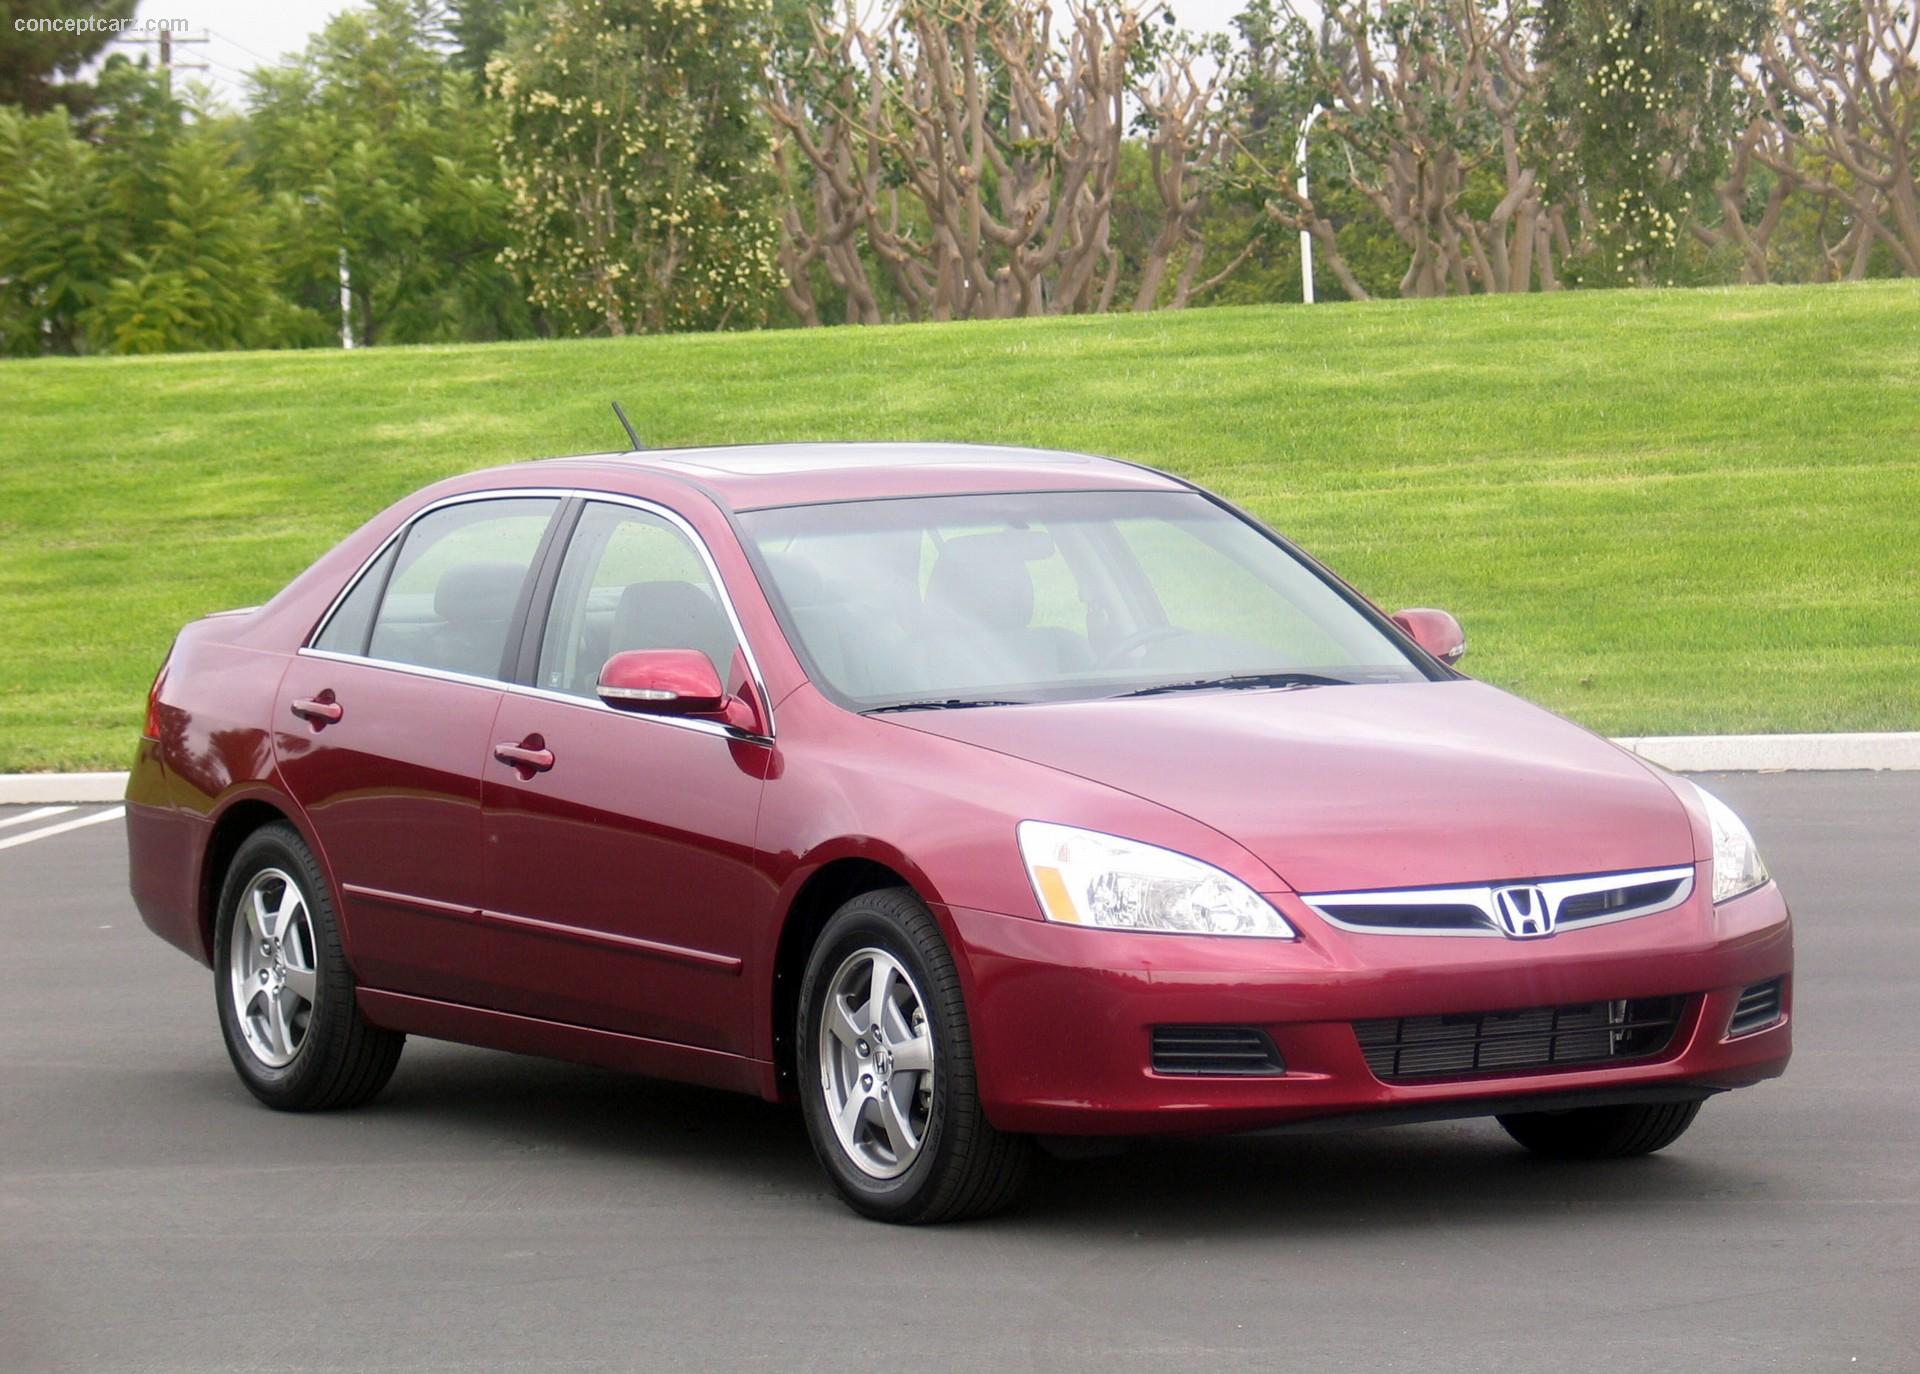 Honda Accord Technical Specifications and data. Engine, Dimensions 